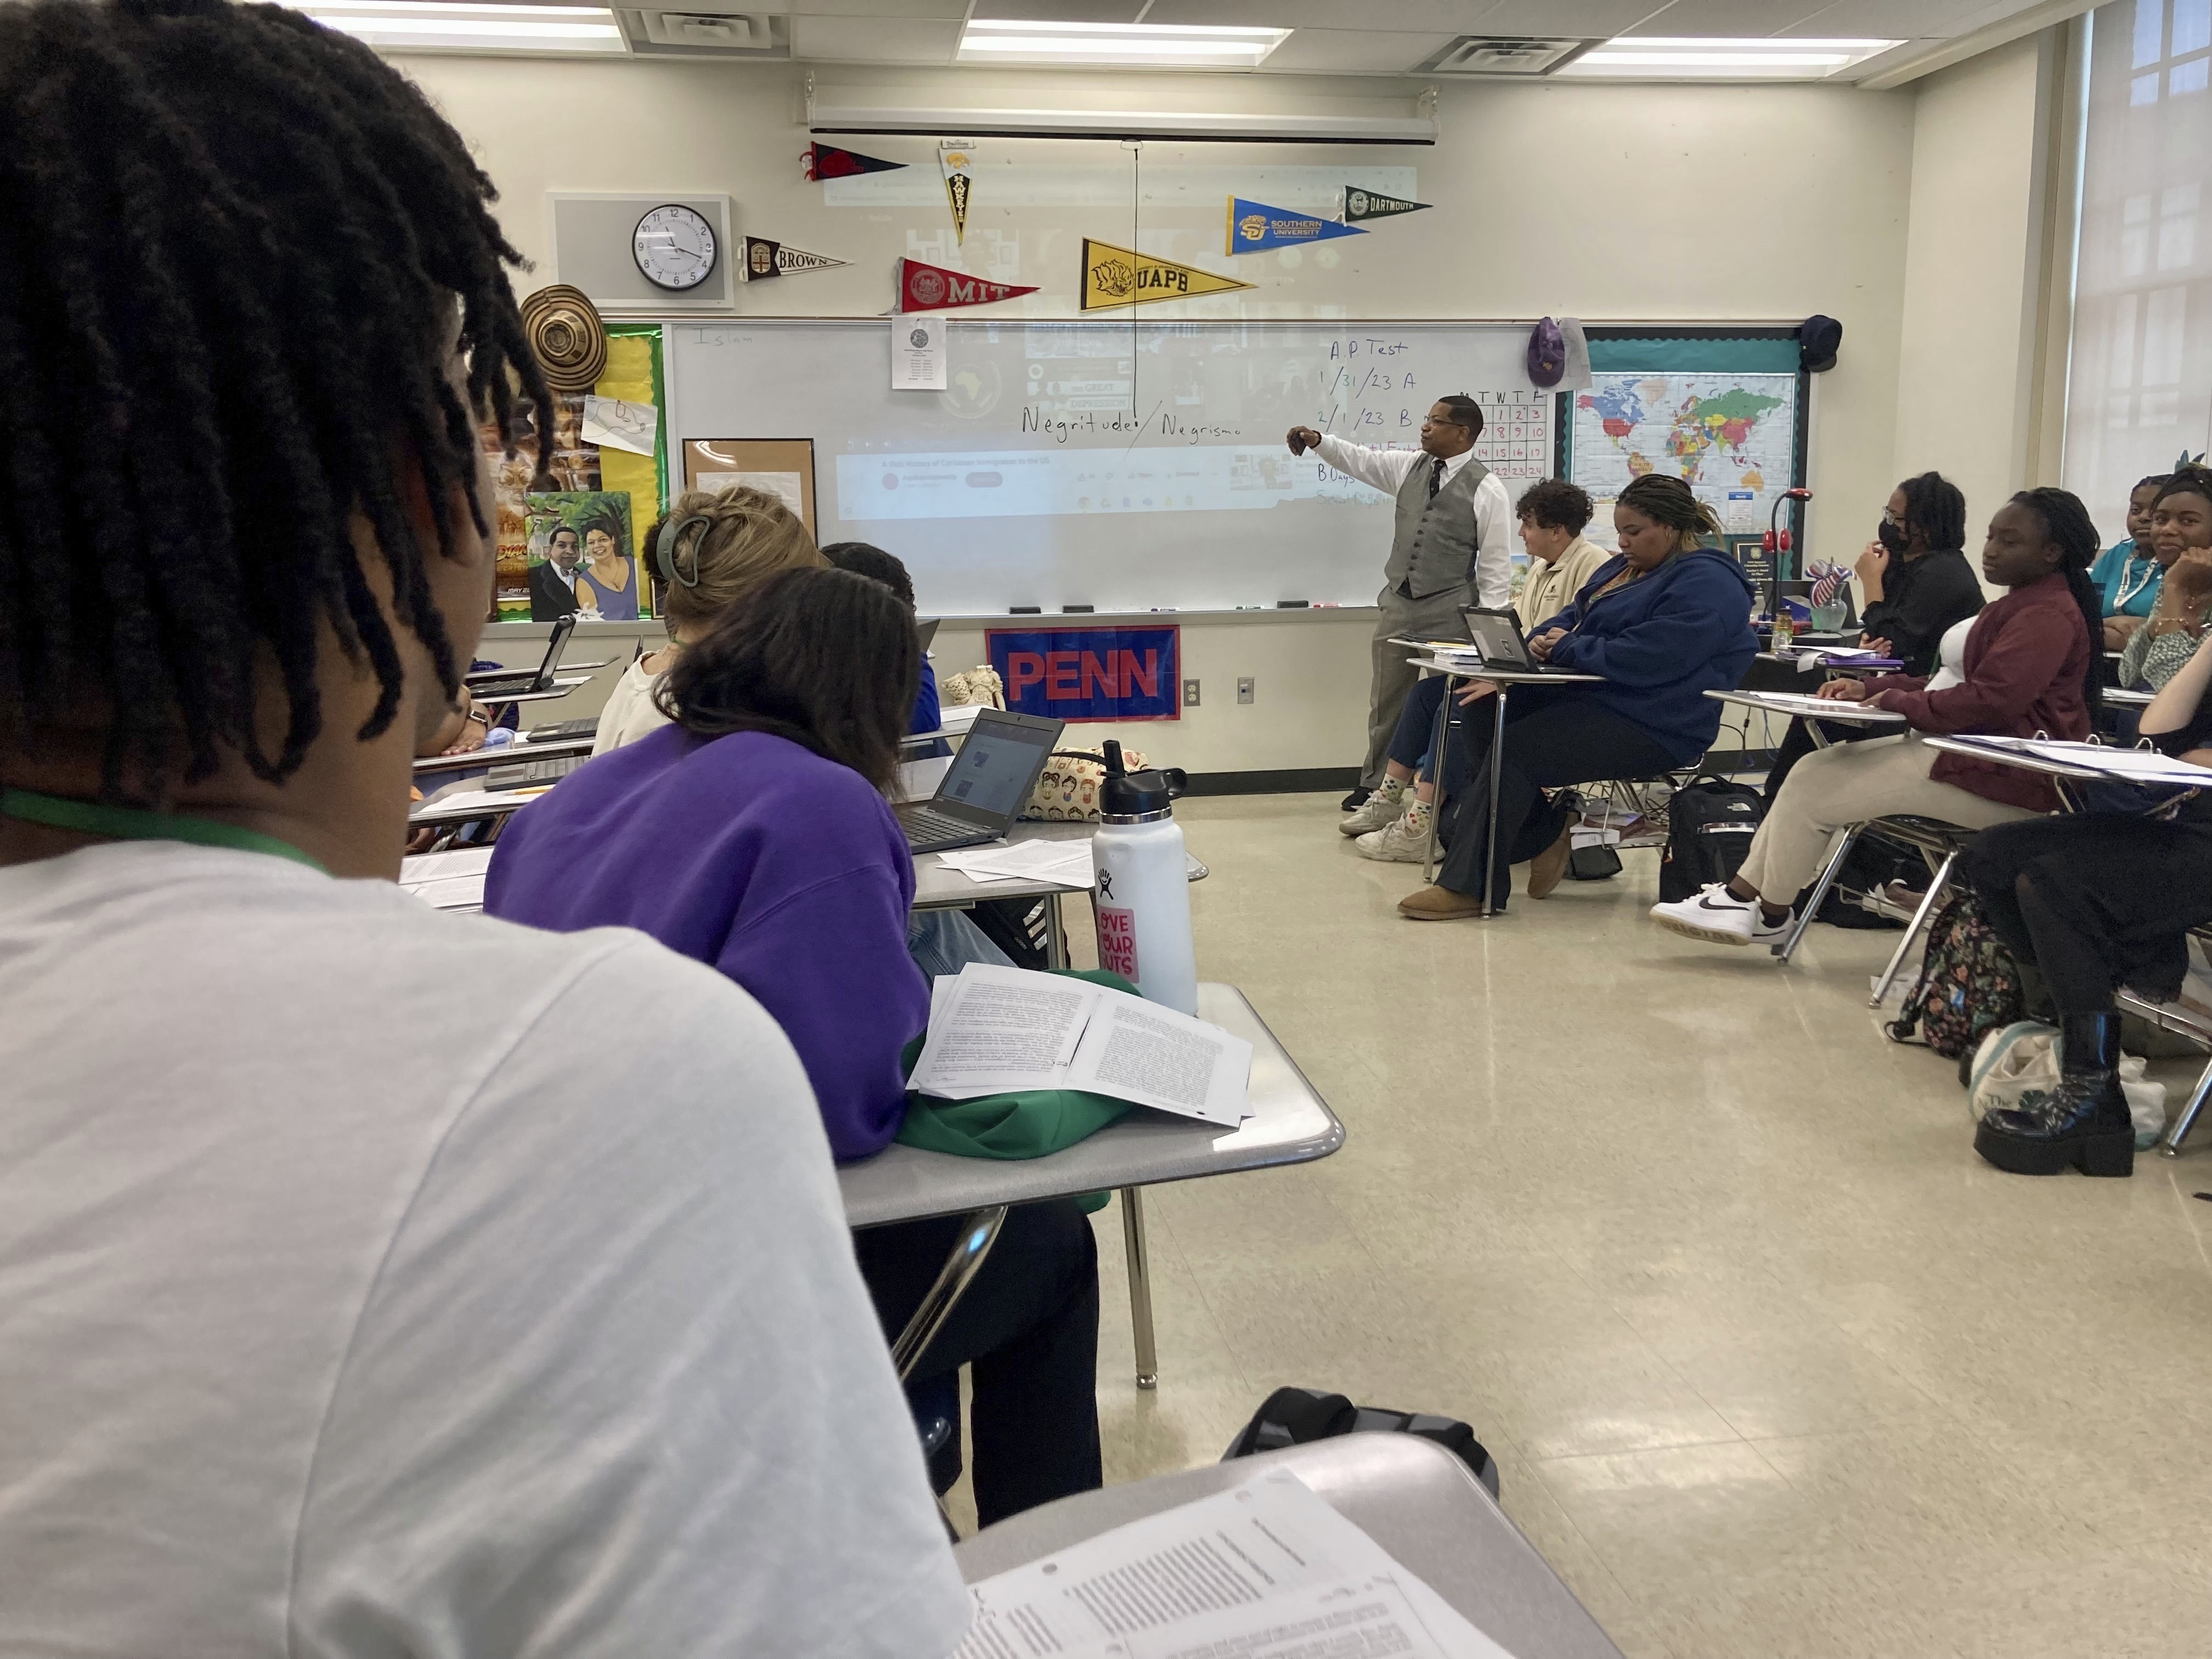 This AP African American Studies Teacher Invited TV Cameras Into His Class to Avoid Controversy